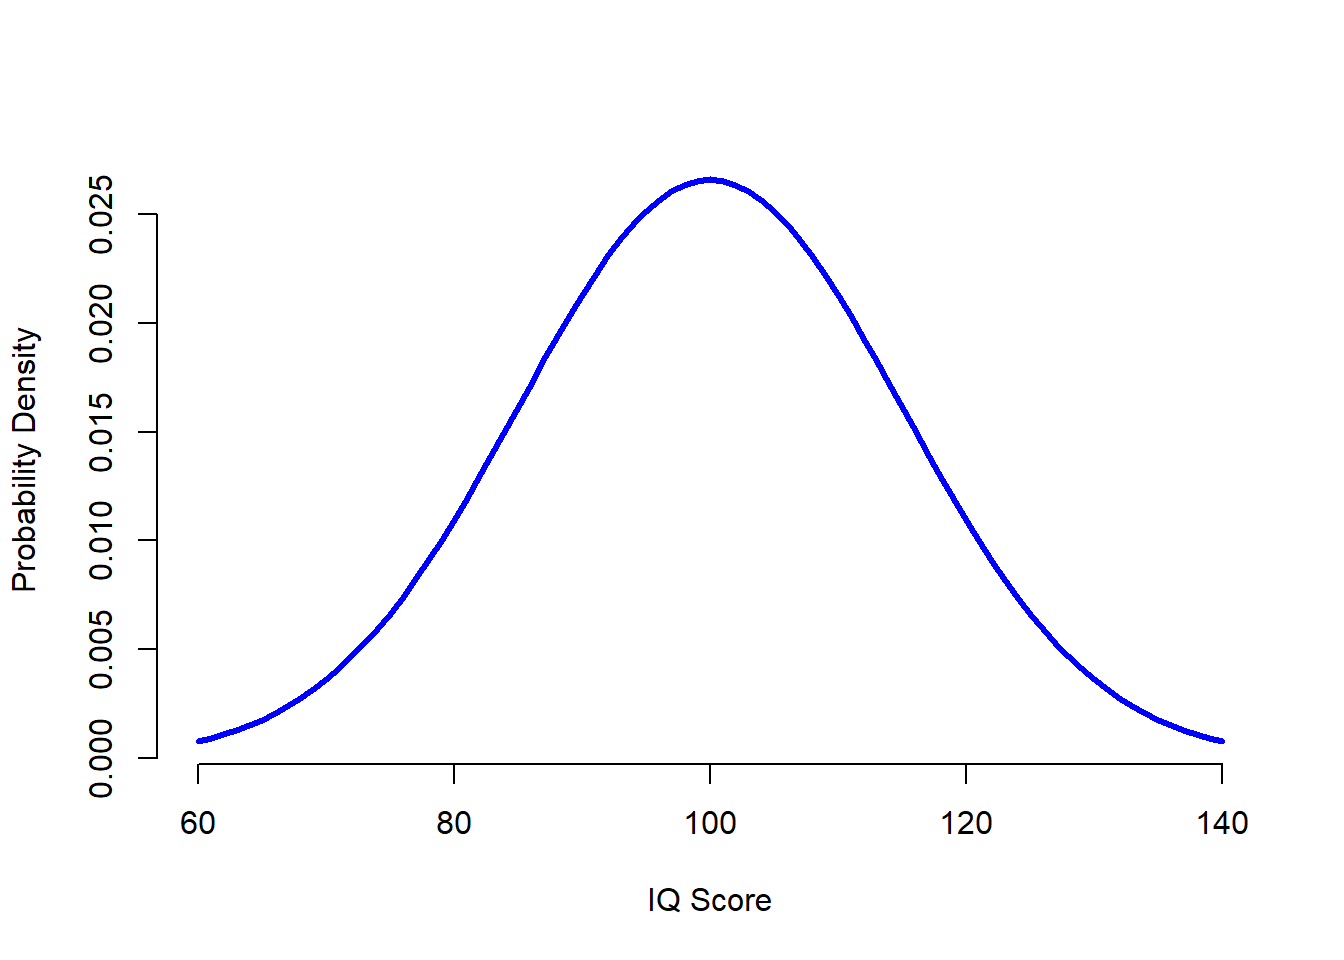 The population distribution of IQ scores (panel a) and two samples drawn randomly from it. In panel b we have a sample of 100 observations, and panel c we have a sample of 10,000 observations.